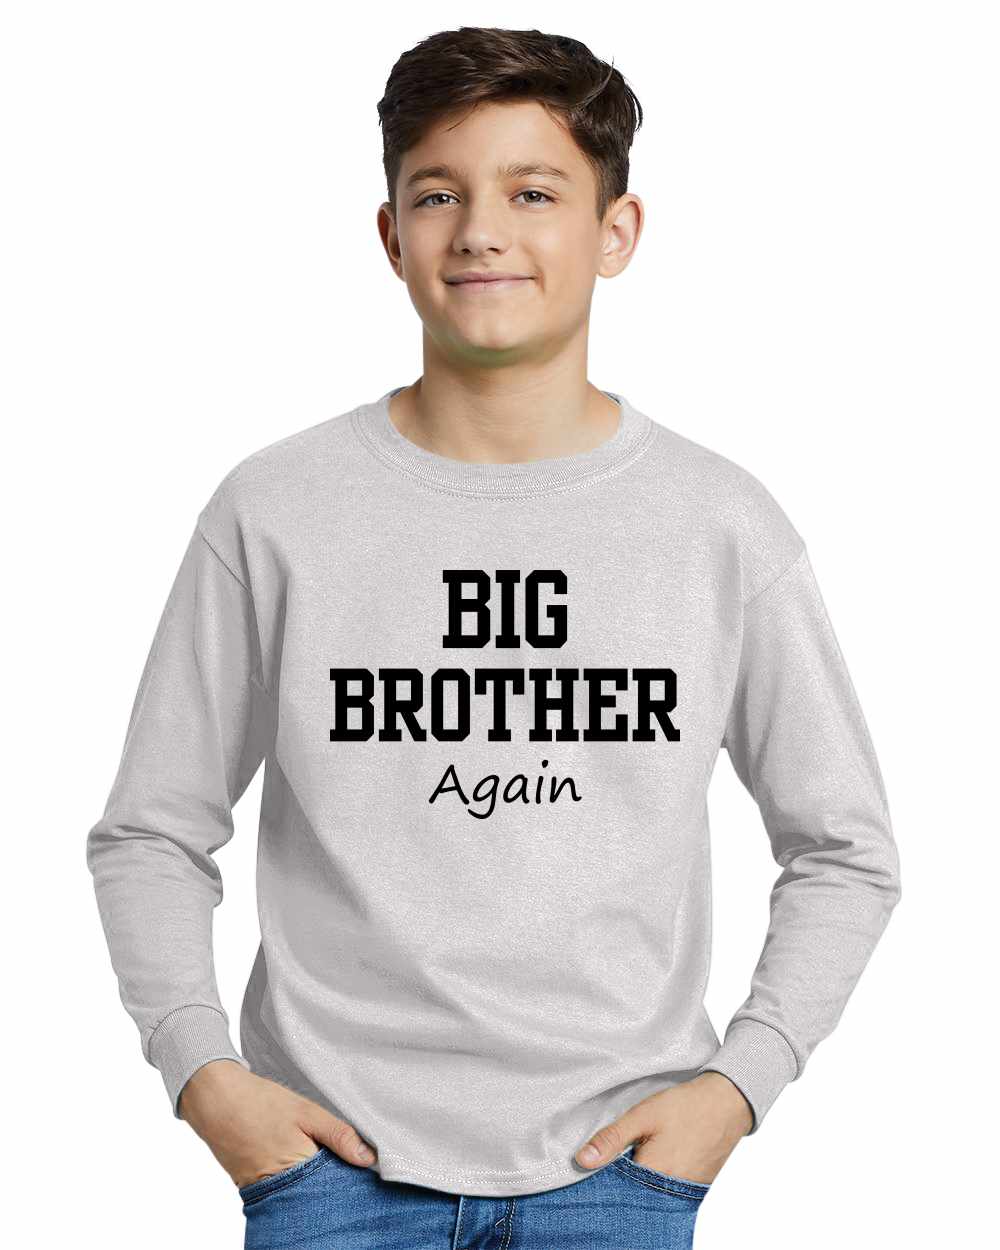 Big Brother Again on Youth Long Sleeve Shirt